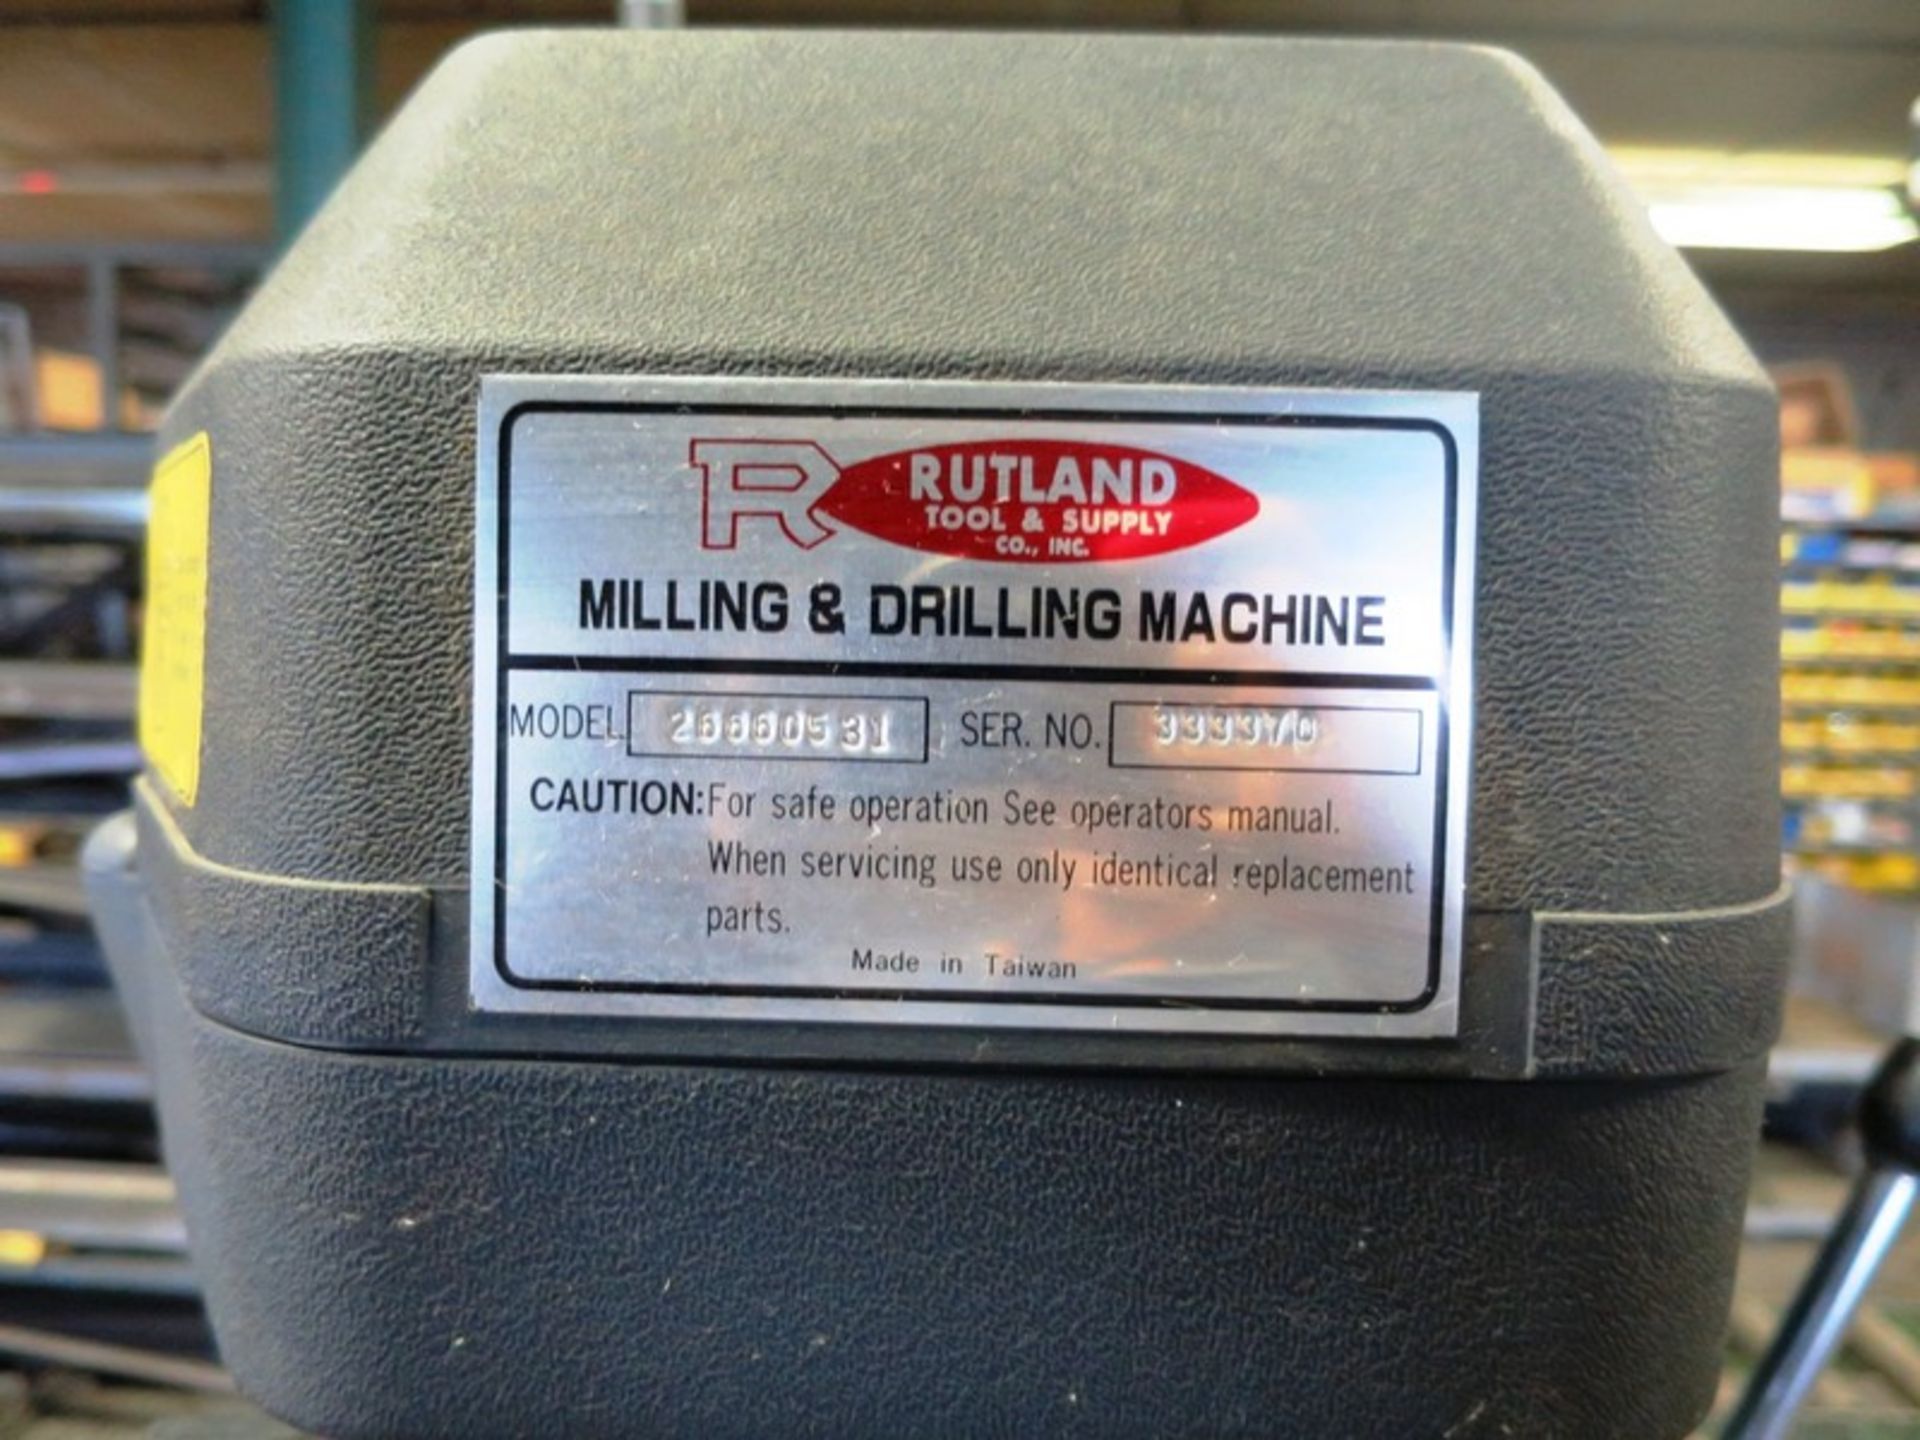 Rutland Milling and Drilling Machine Model: 26660531, S/N: 333370 - Image 2 of 2